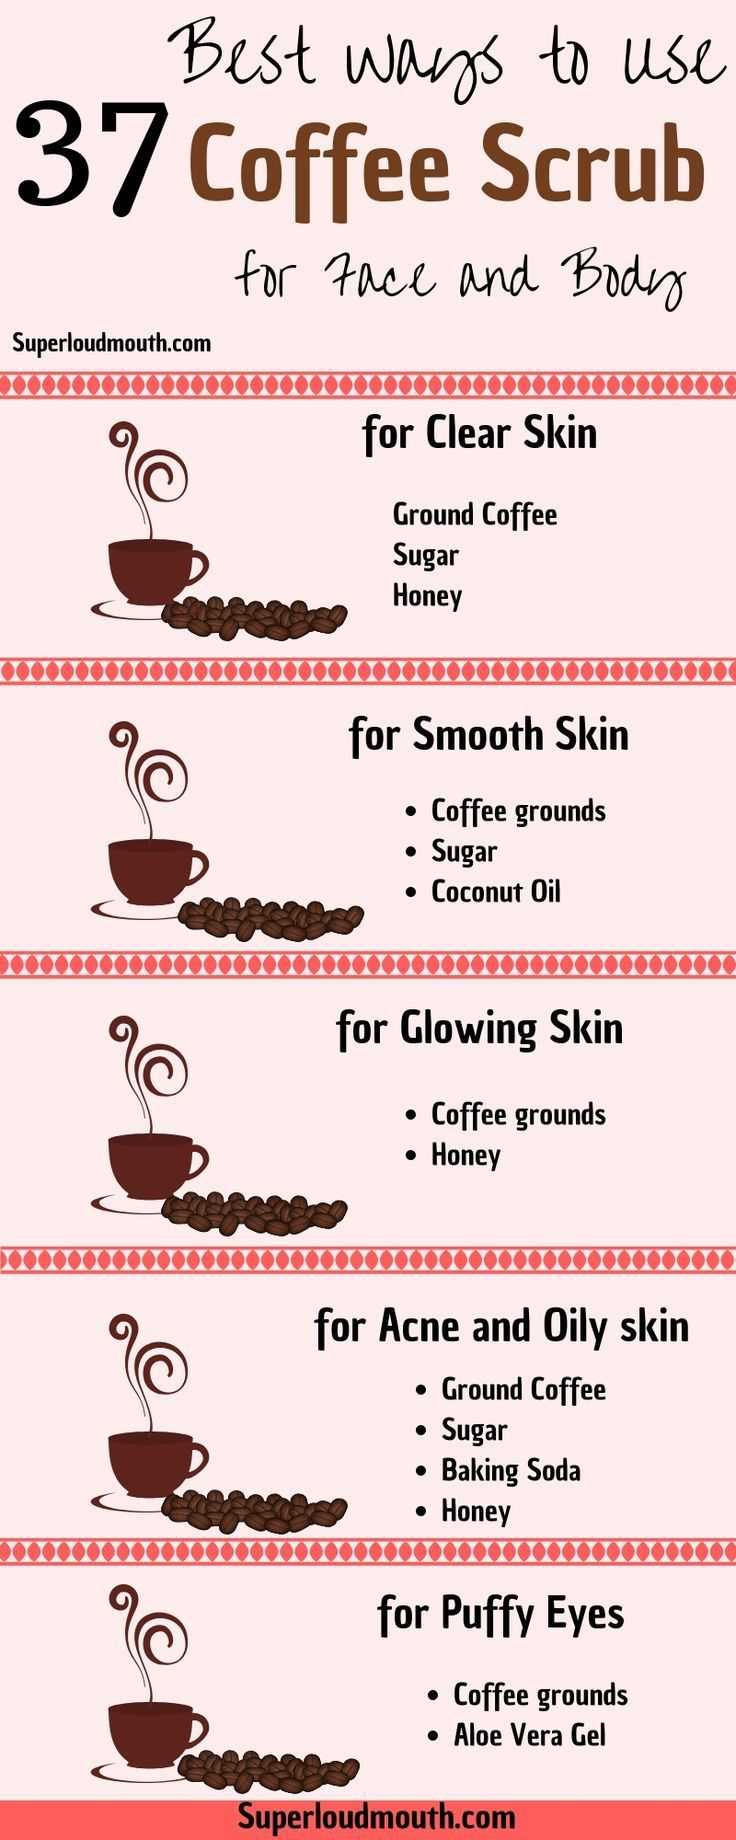 37 Diy Coffee Scrub Recipes for a Beautiful Face, Body and Cellulite -   21 beauty Skin diy ideas